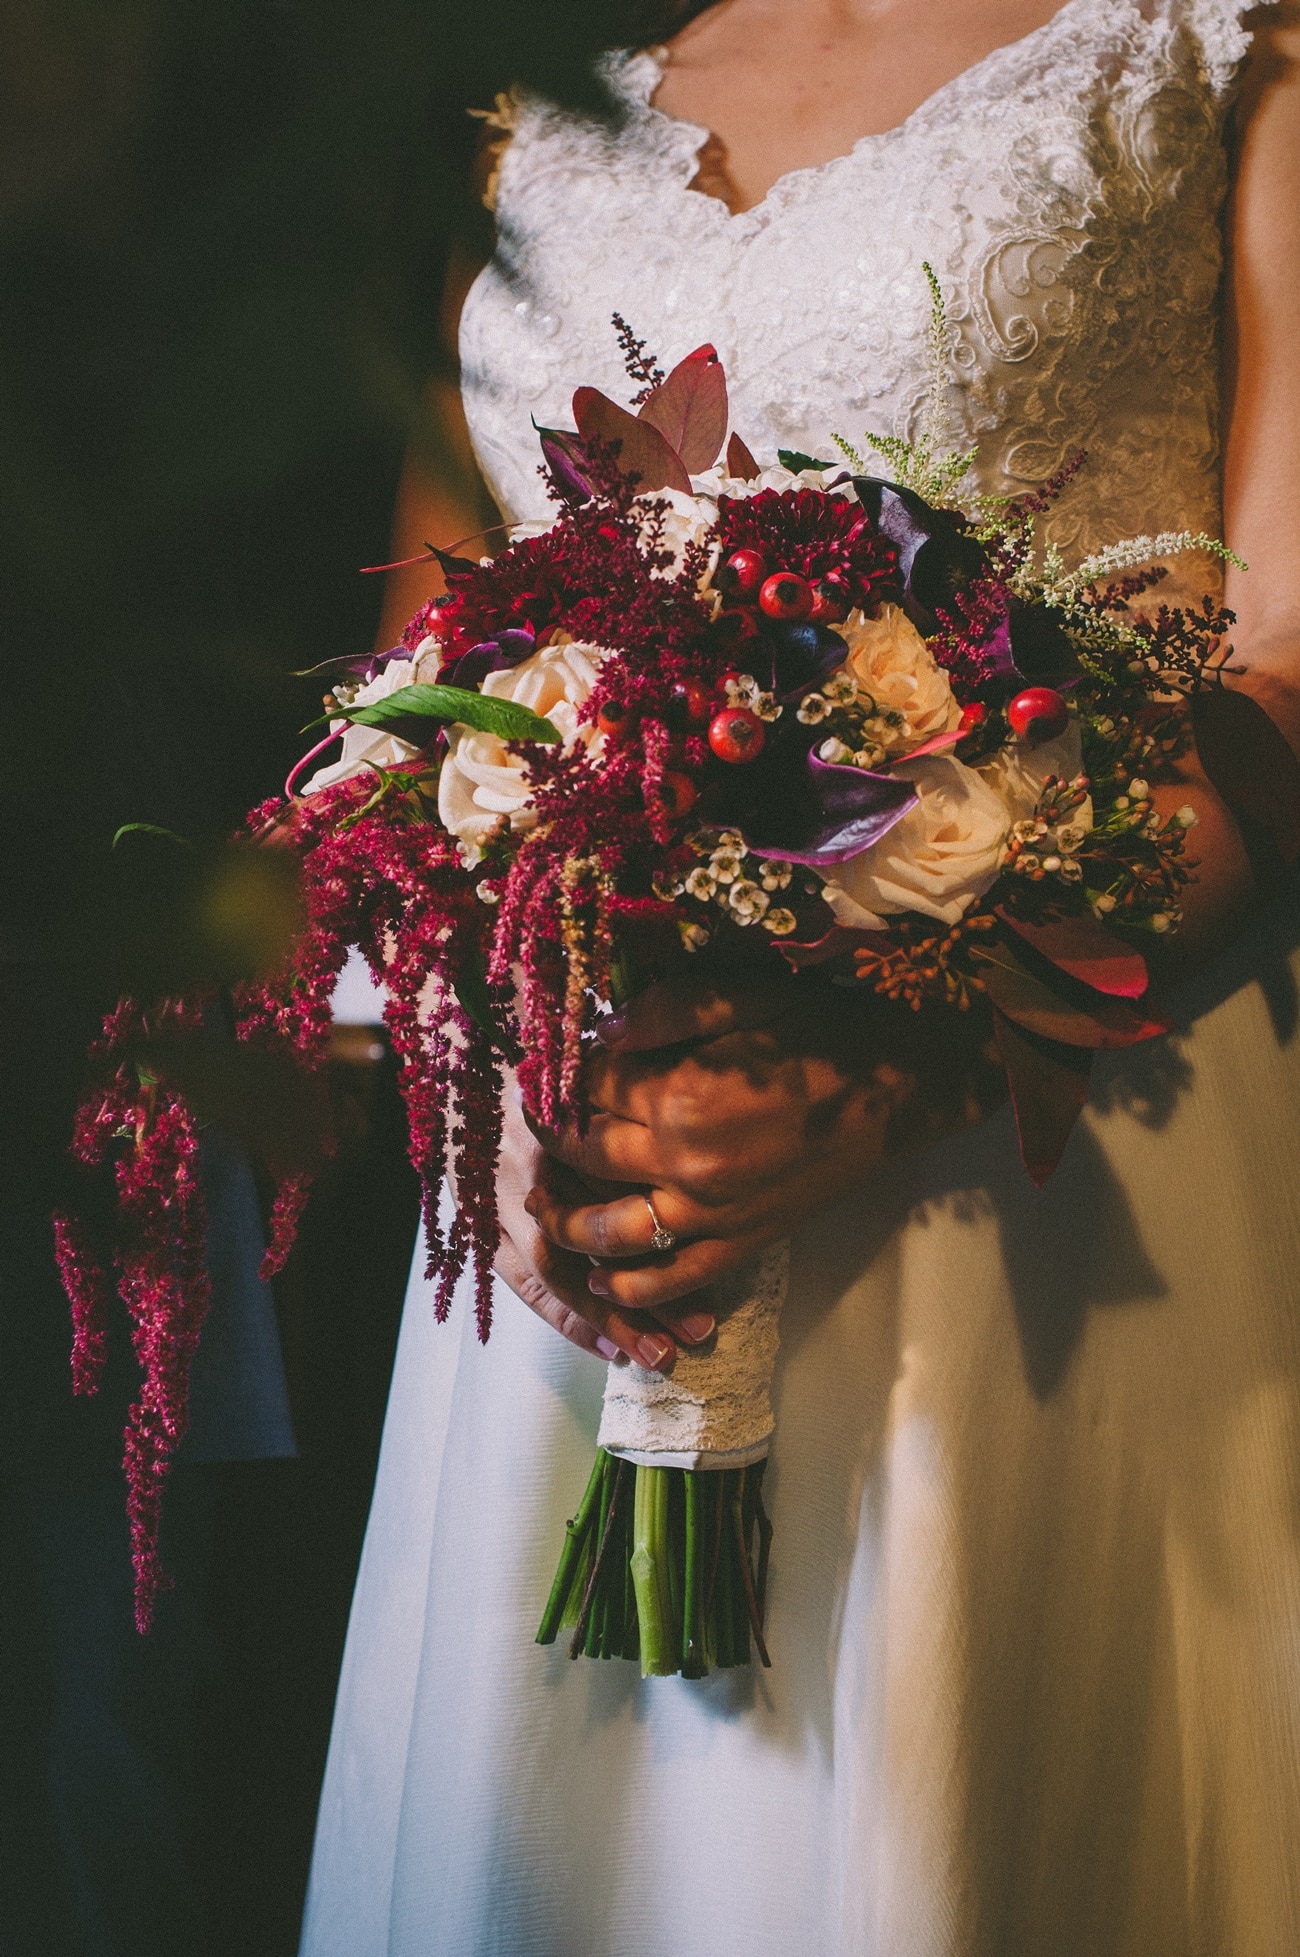 Bridal bouquet in dark red colors with cala lilies, roses and berries